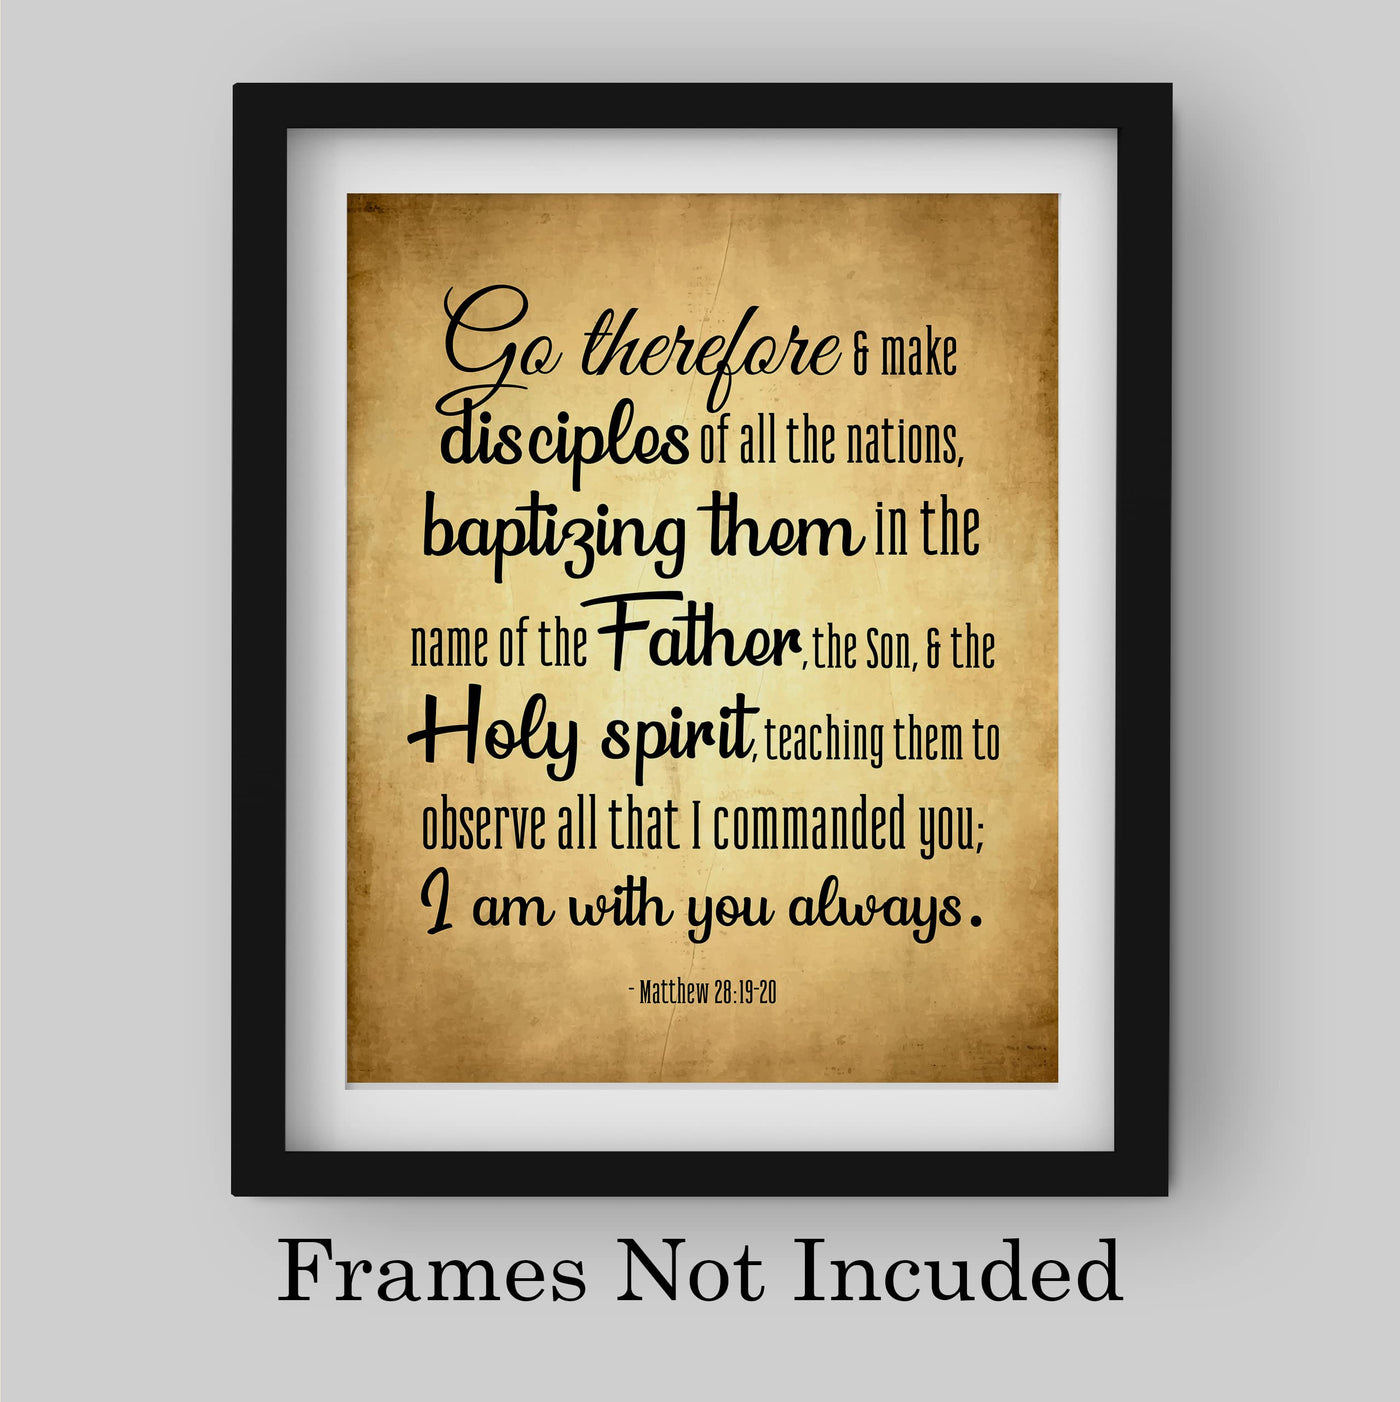 Go & Make Disciples of All the Nations Bible Verse Wall Decor -8 x 10" Scripture Art Print -Ready to Frame. Home-Office-Church-Sunday School Decor. Perfect Christian Gift of Faith! Matthew 28:19-20